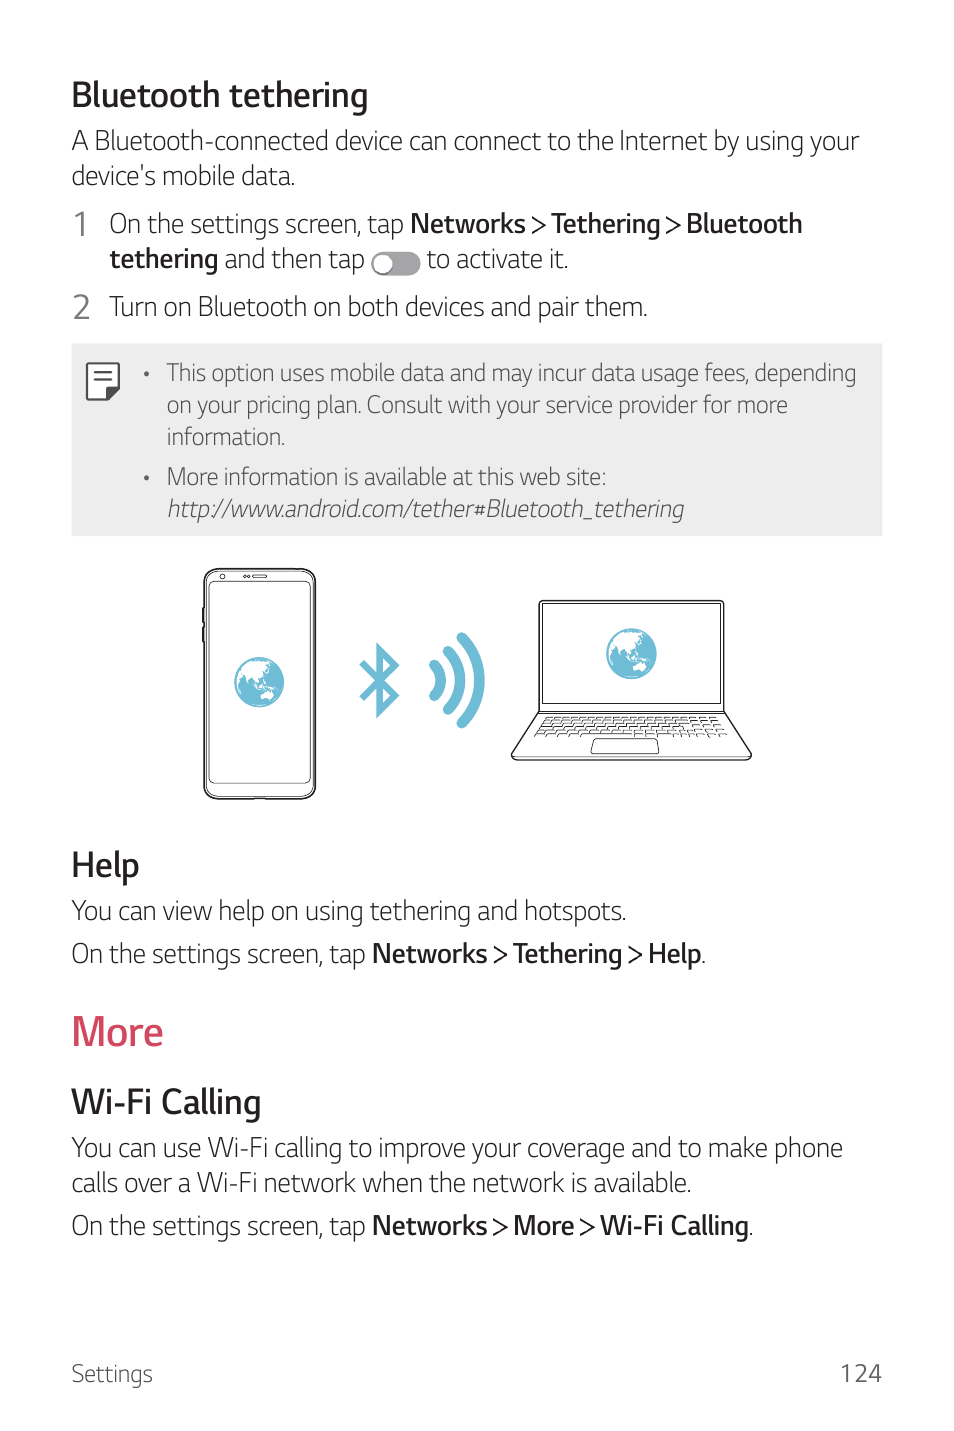 More, Bluetooth tethering, Help | Wi-fi calling | LG G6 H872 User Manual | Page 125 / 183